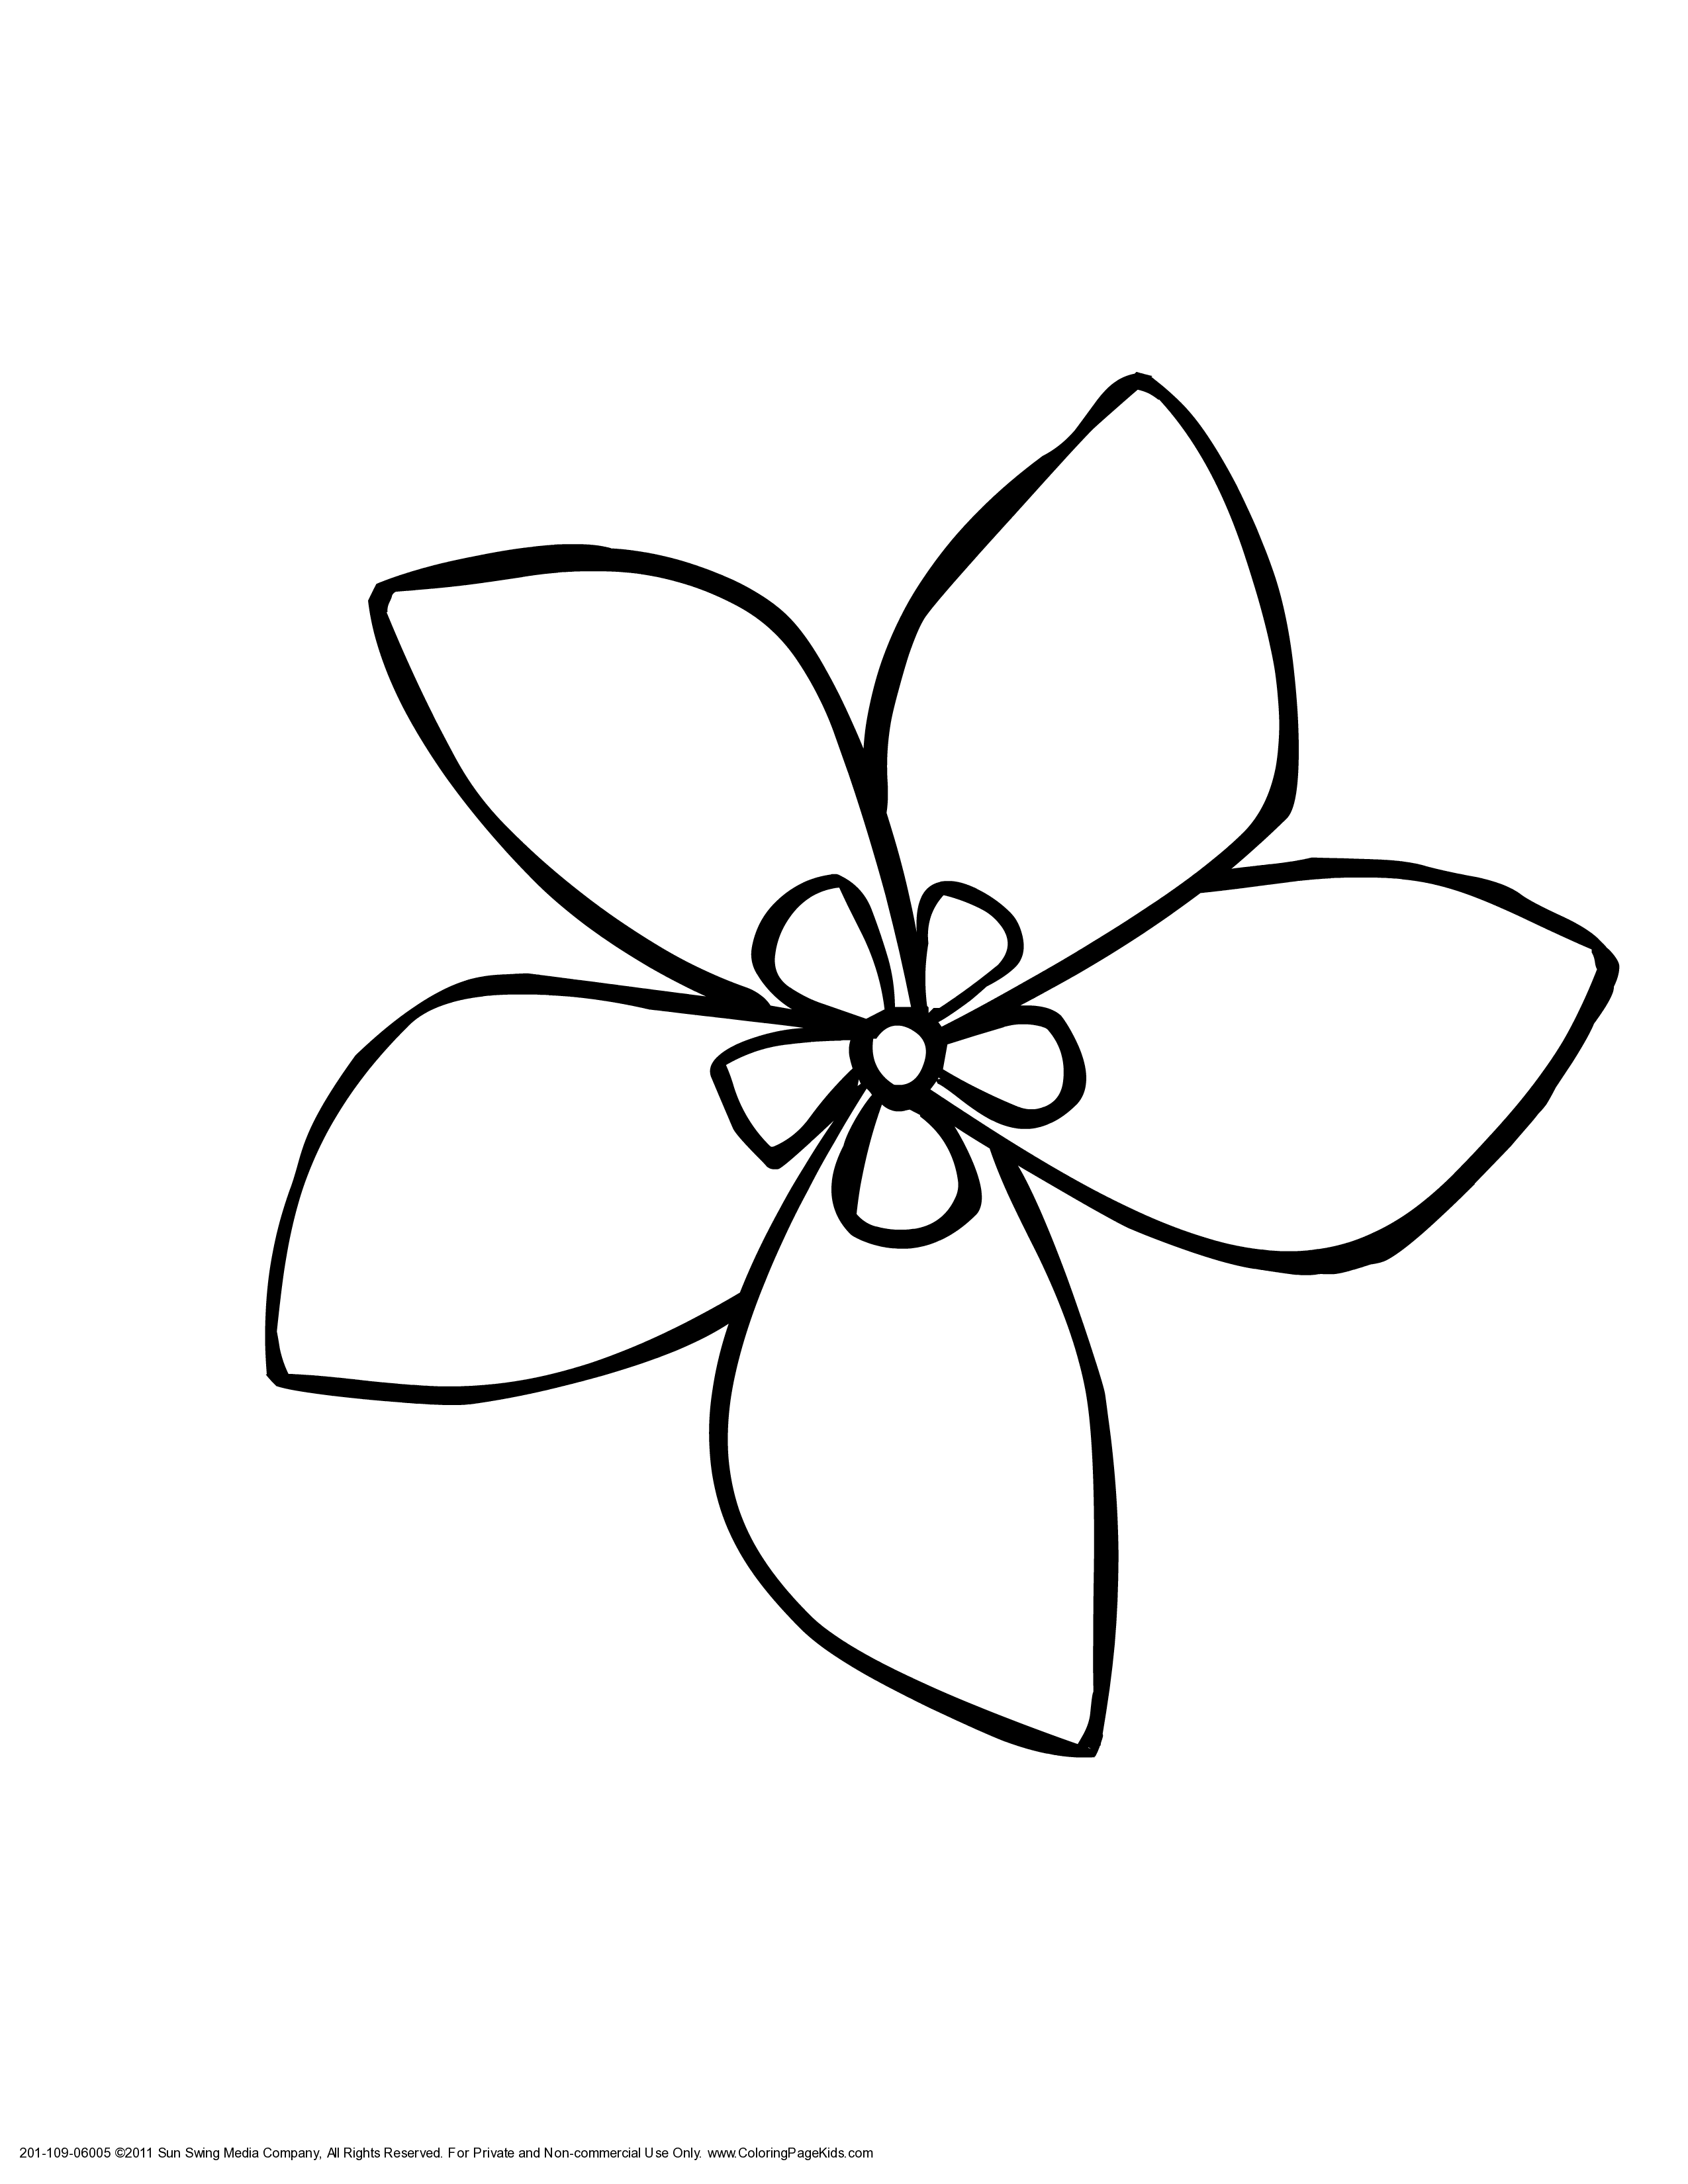 Jasmine Flower Coloring Pages - AZ Coloring Pages